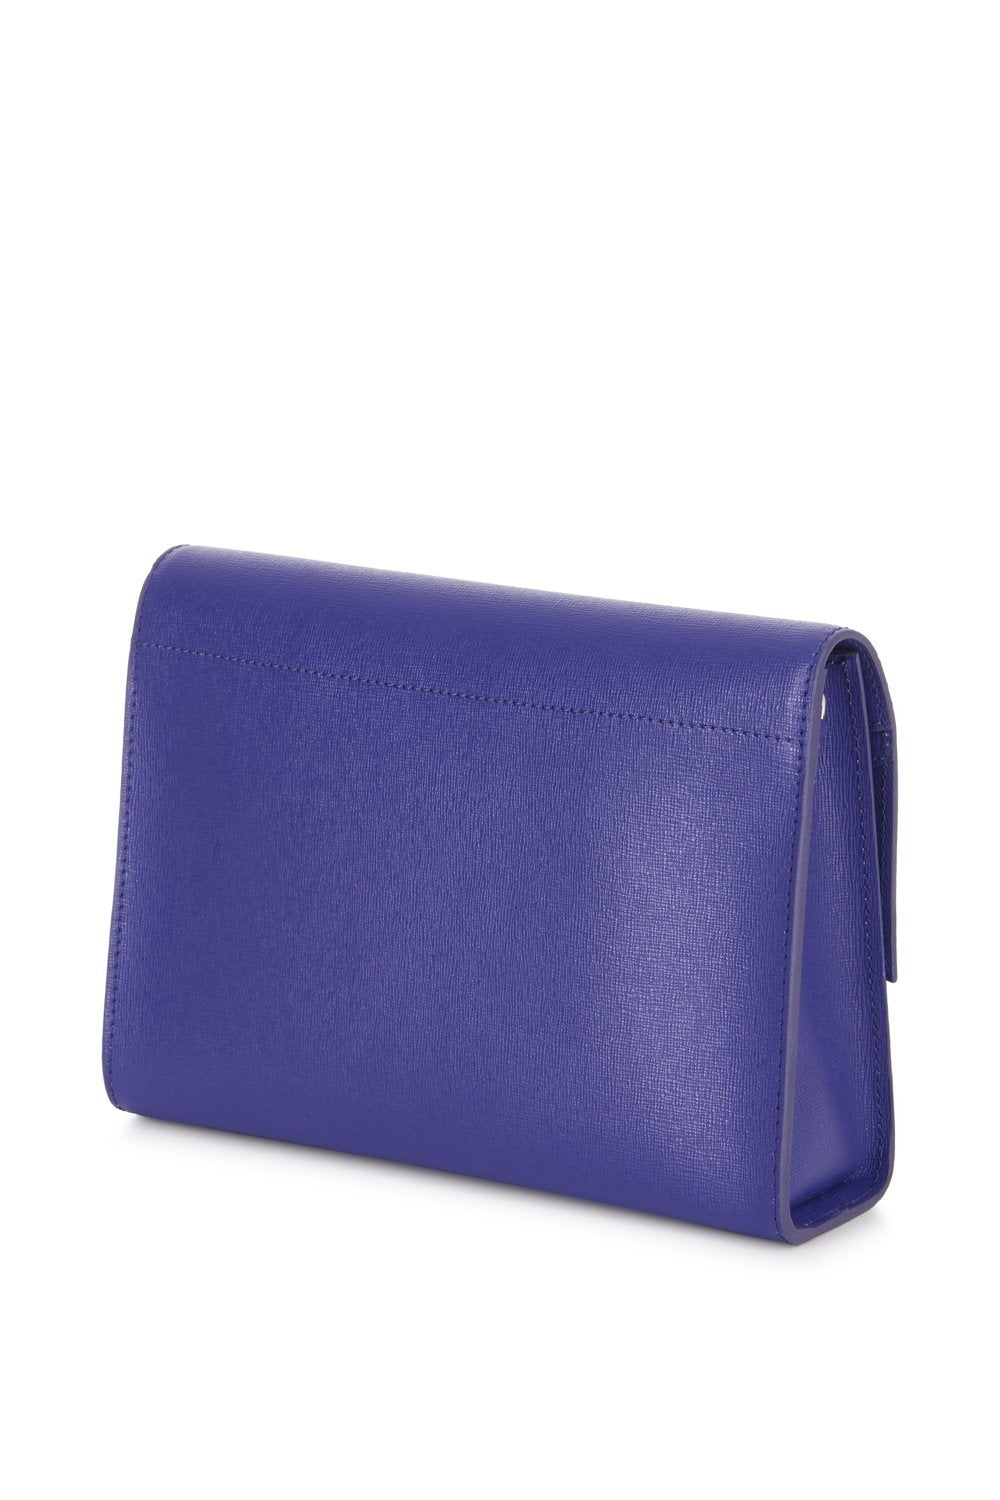 Alex Cross Body Bag | Violet Saffiano Leather – Stacy Chan Limited